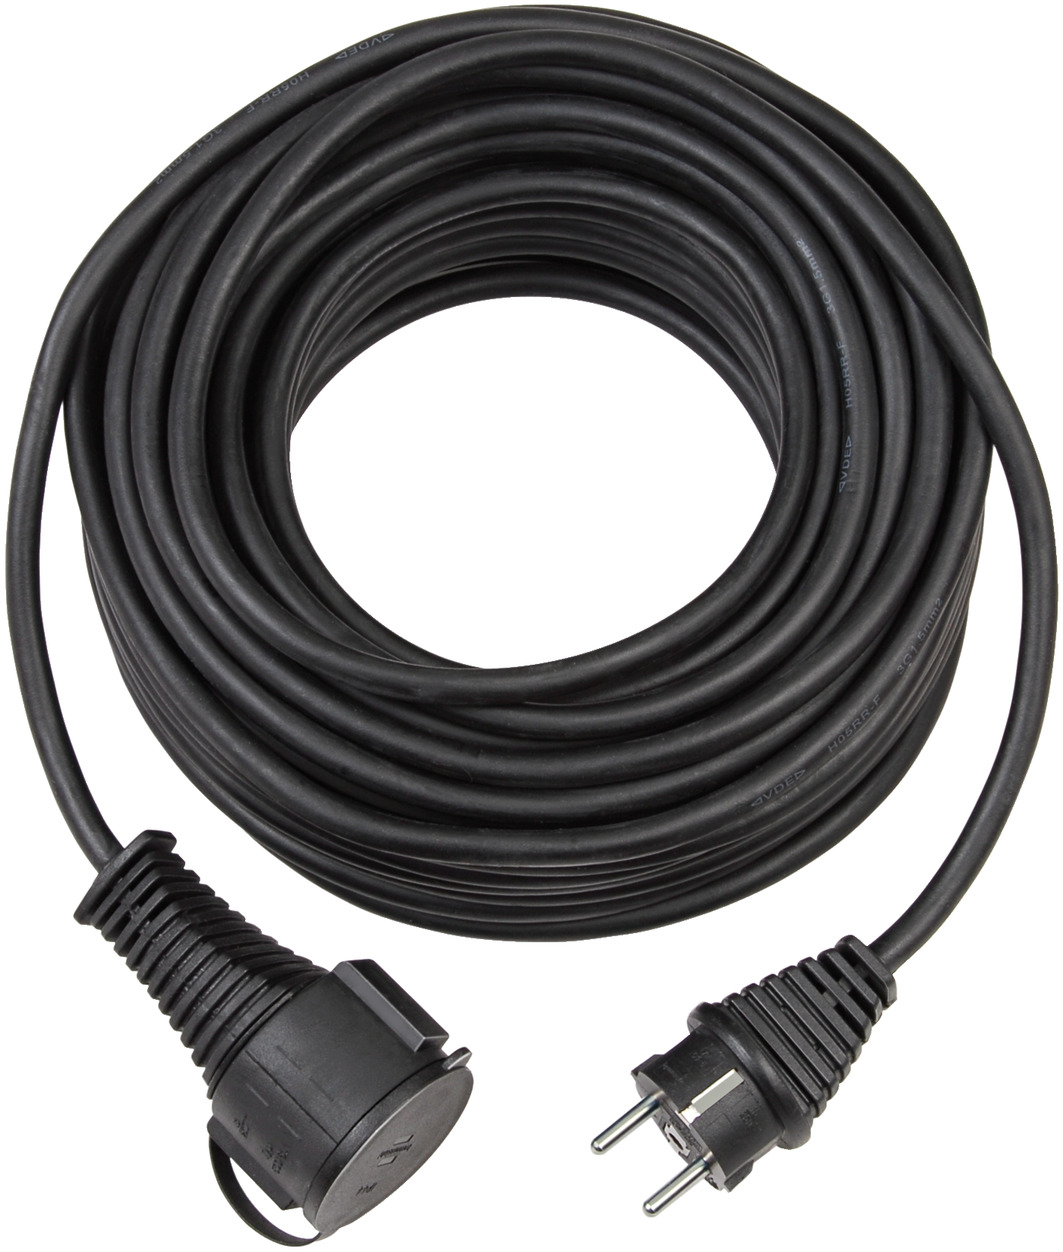 Quality extension rubber cable IP44 5m black H05RR-F 3G1,5 | brennenstuhl®